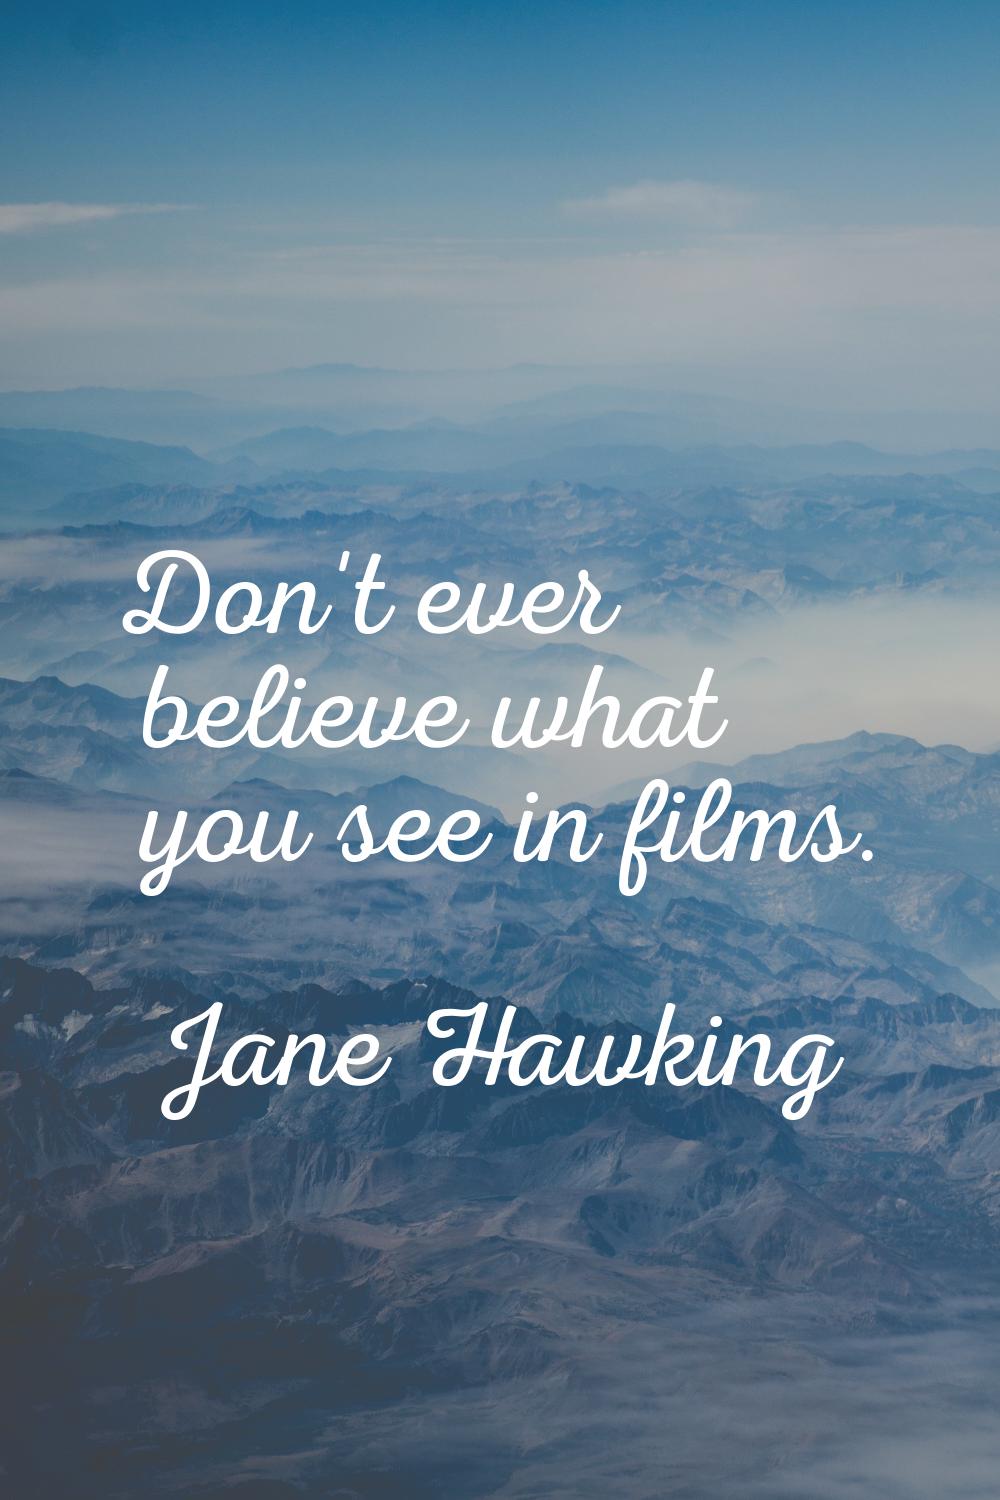 Don't ever believe what you see in films.